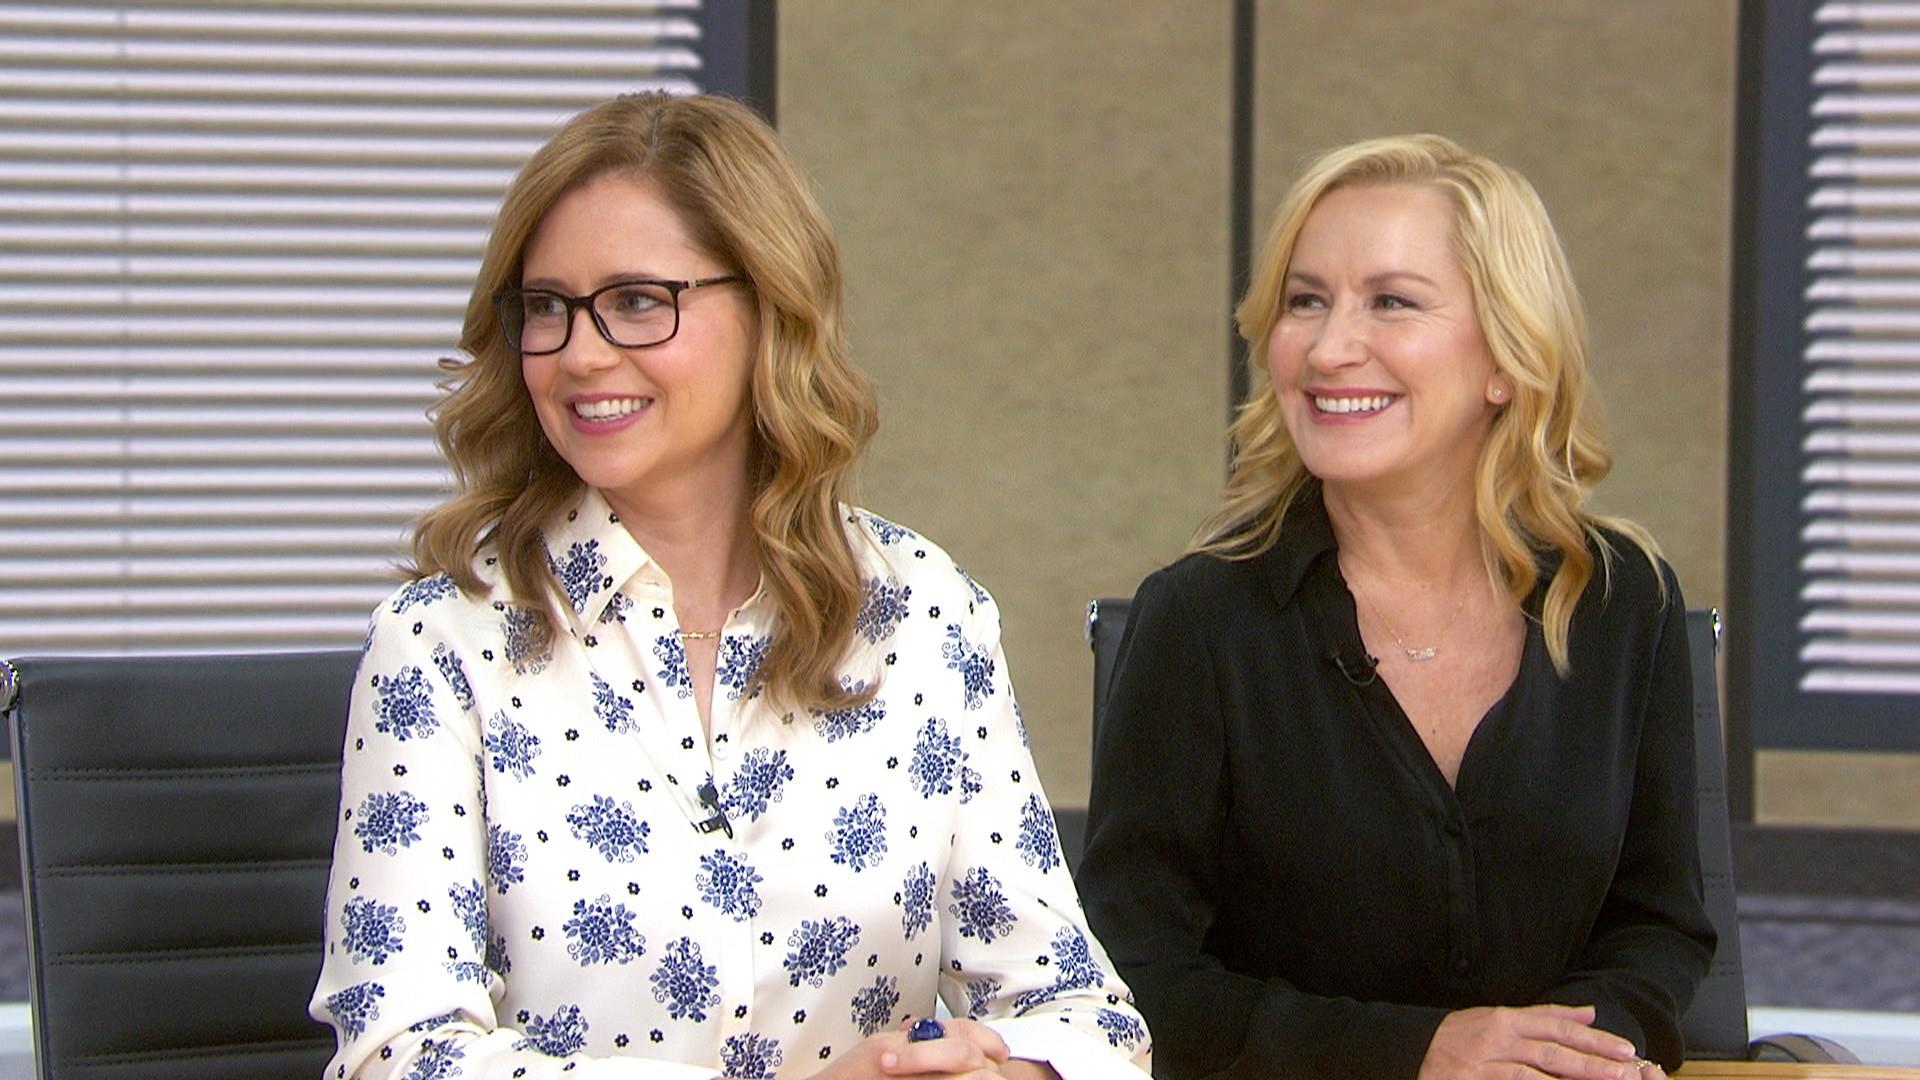 Jenna Fischer and Angela Kinsey talk about their new 'Office' podcast